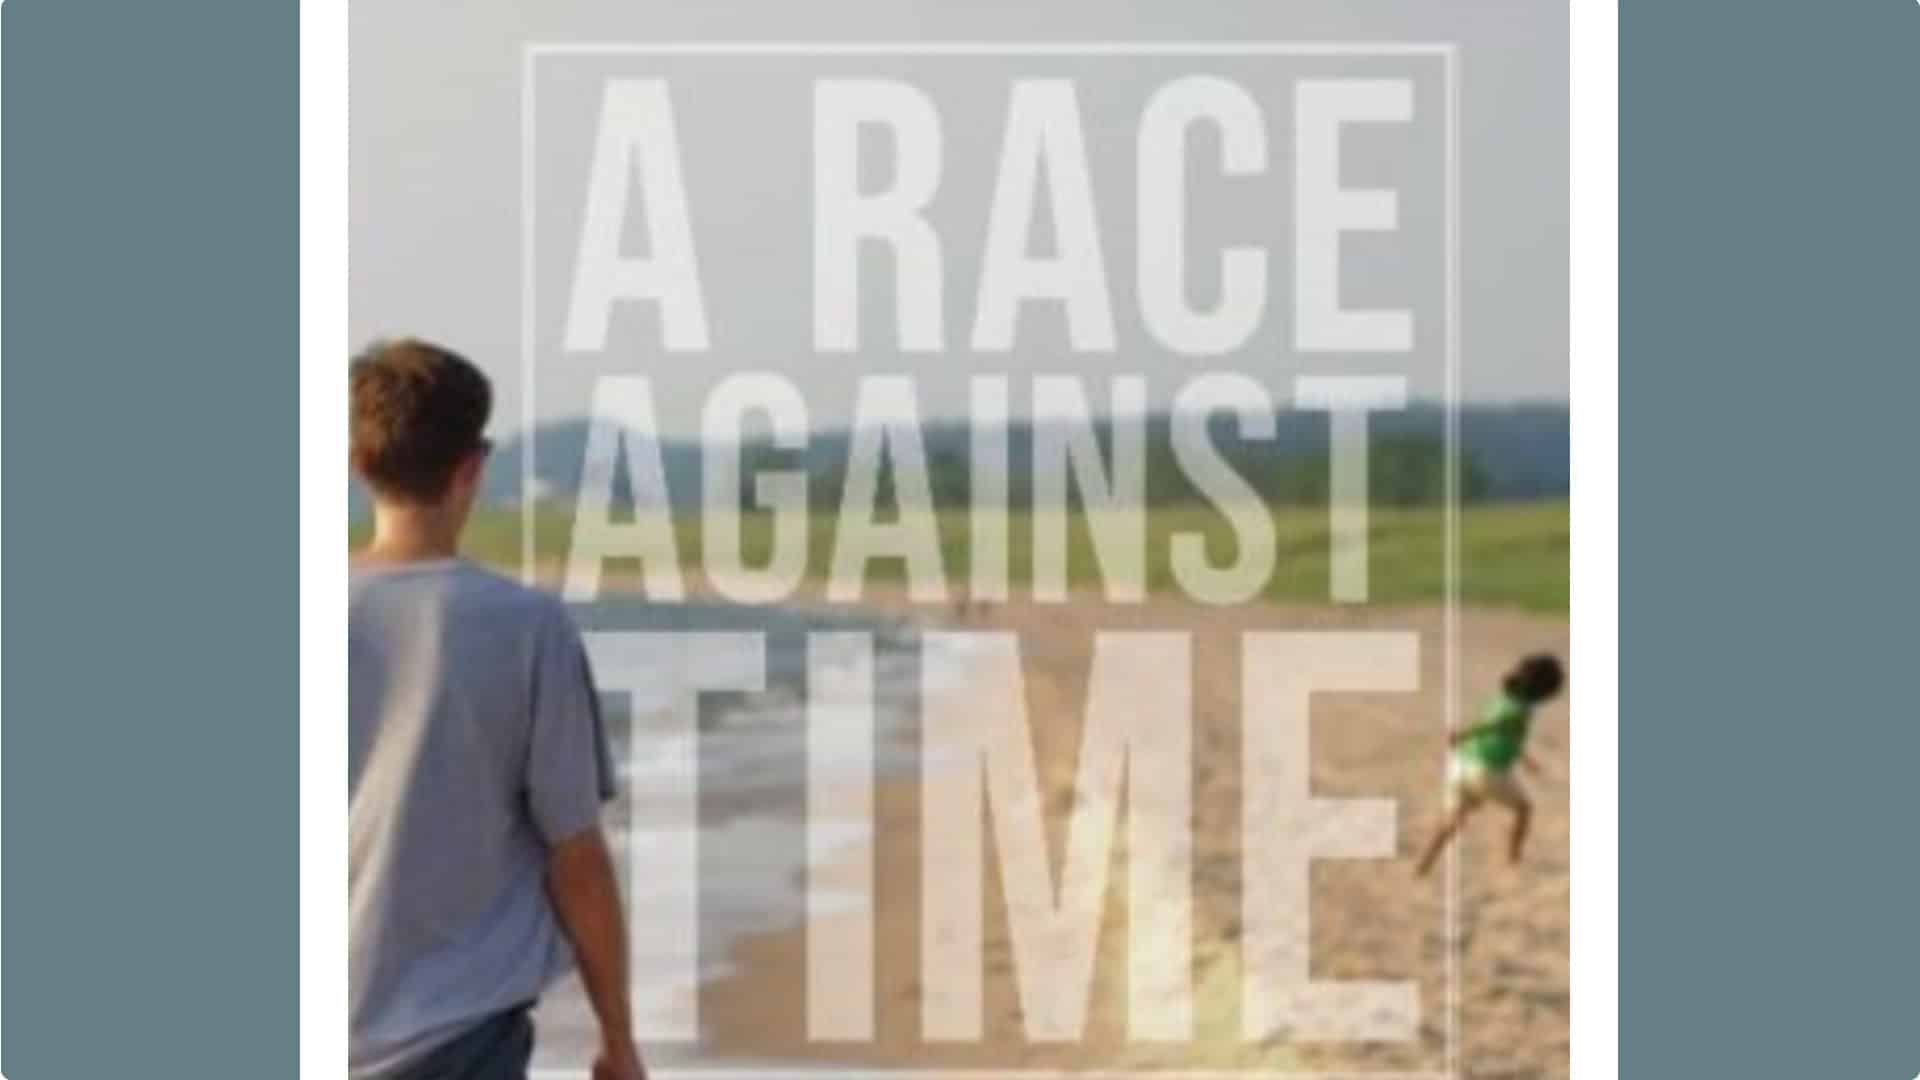 A Race Against Time book cover